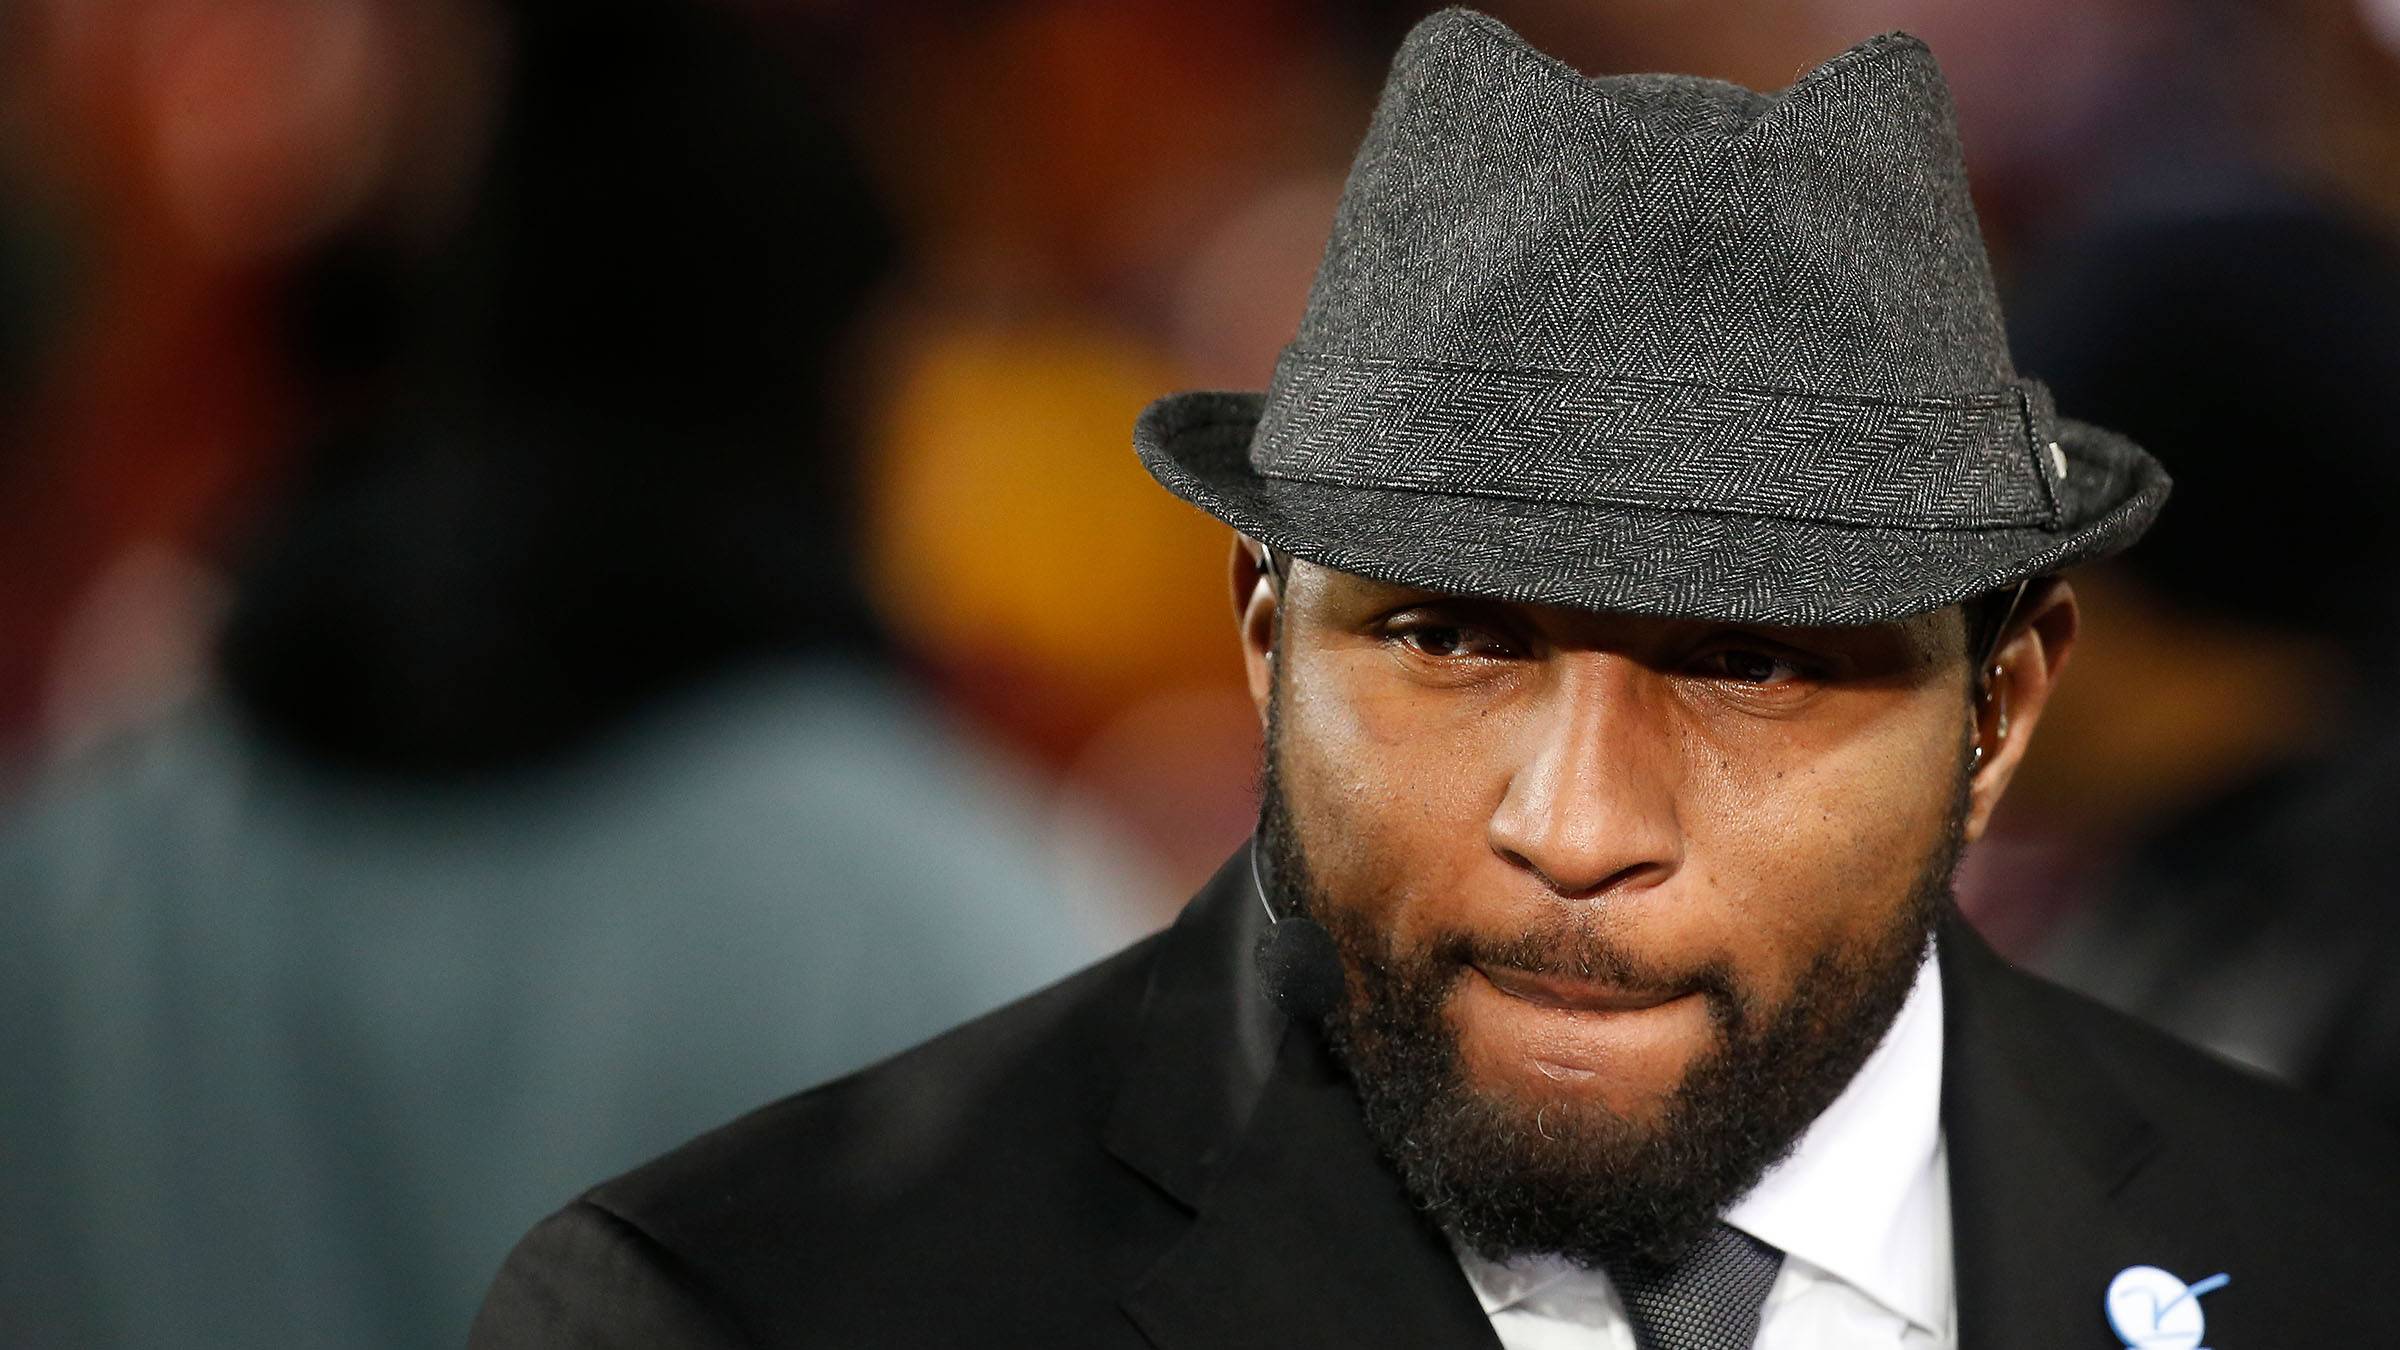 Ray Lewis III, son of NFL great Ray Lewis, dies at 28